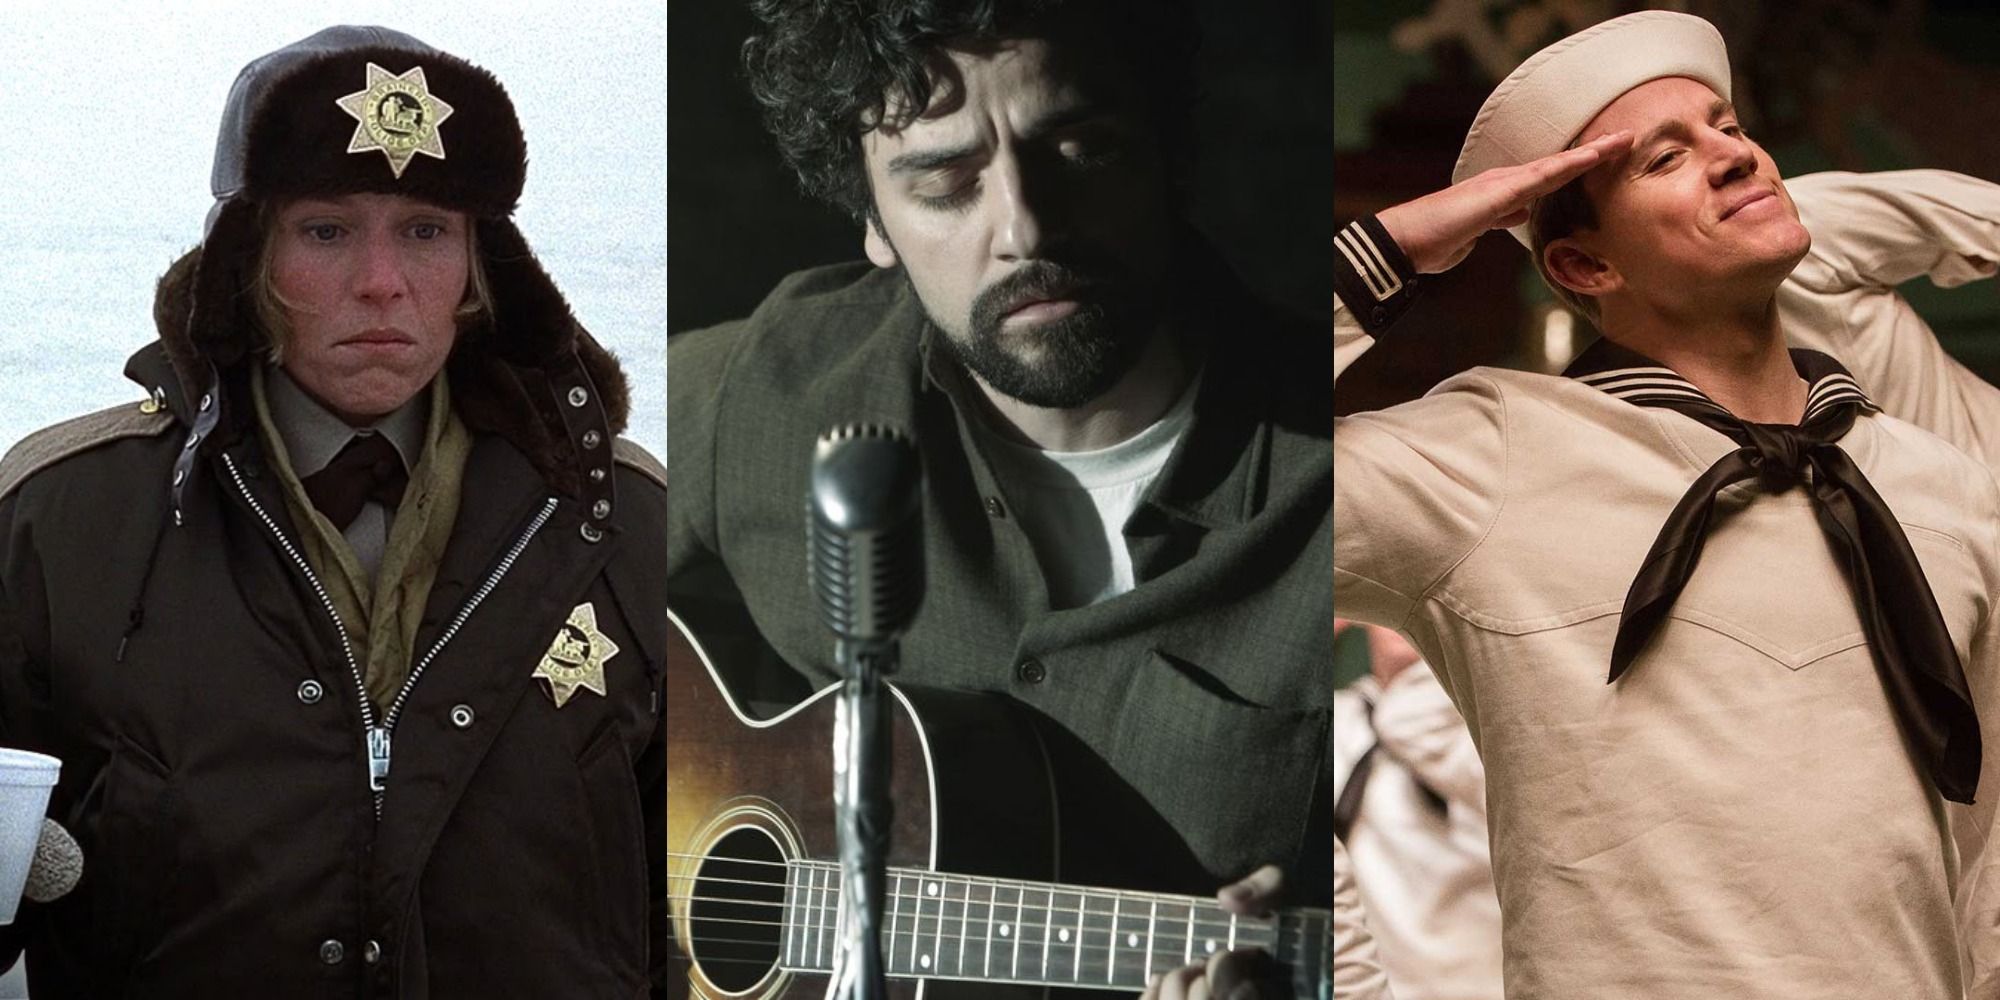 A collage of Frances McDormand standing outside in Fargo, Oscar Isaac playing guitar in Inside Llewyn Davis and Channing Tatum saluting in a sailor suit in Hail Caesar!